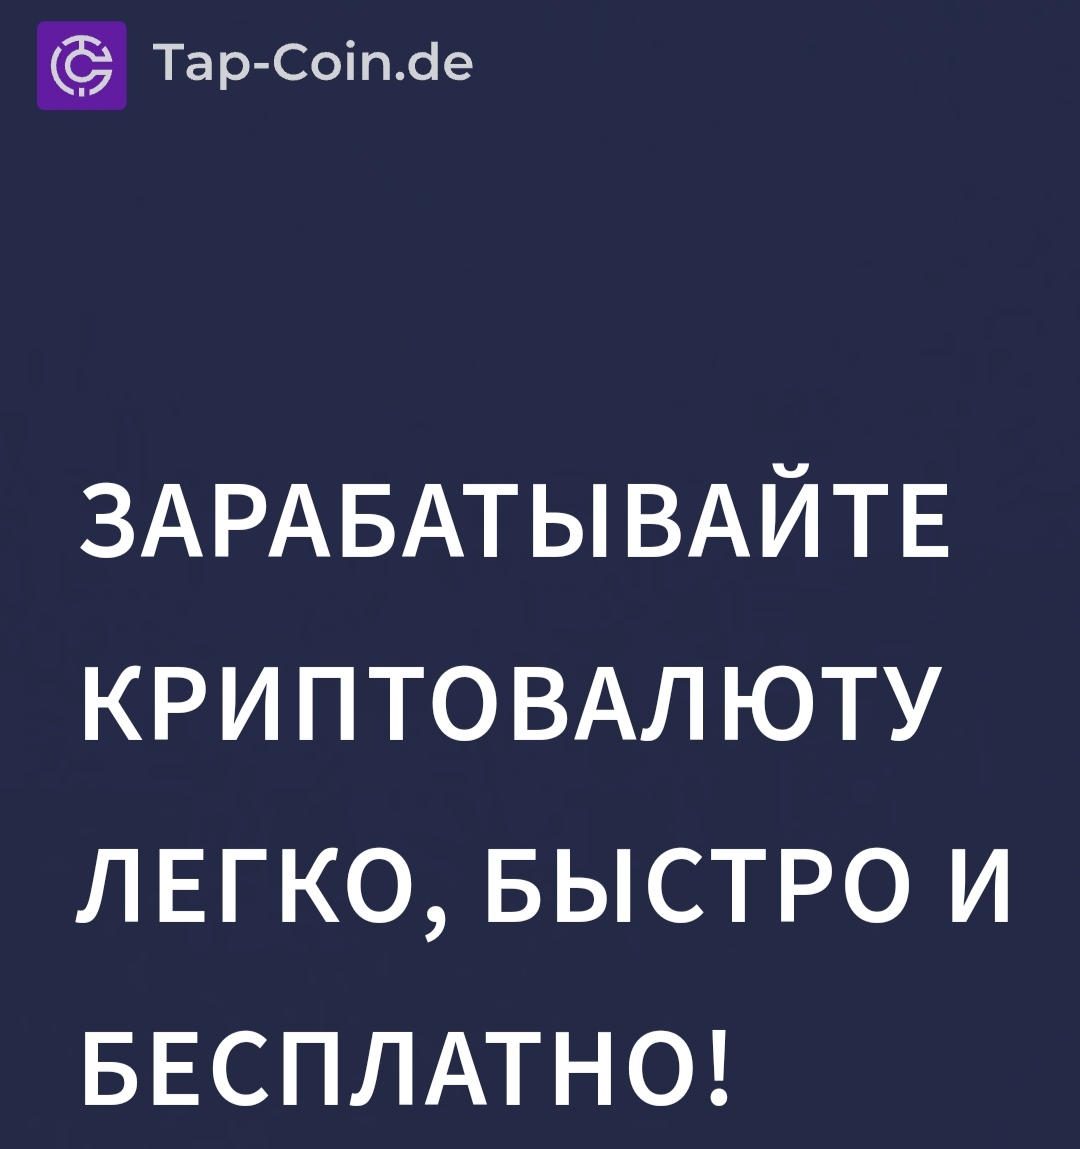 Сайт Tap Coin